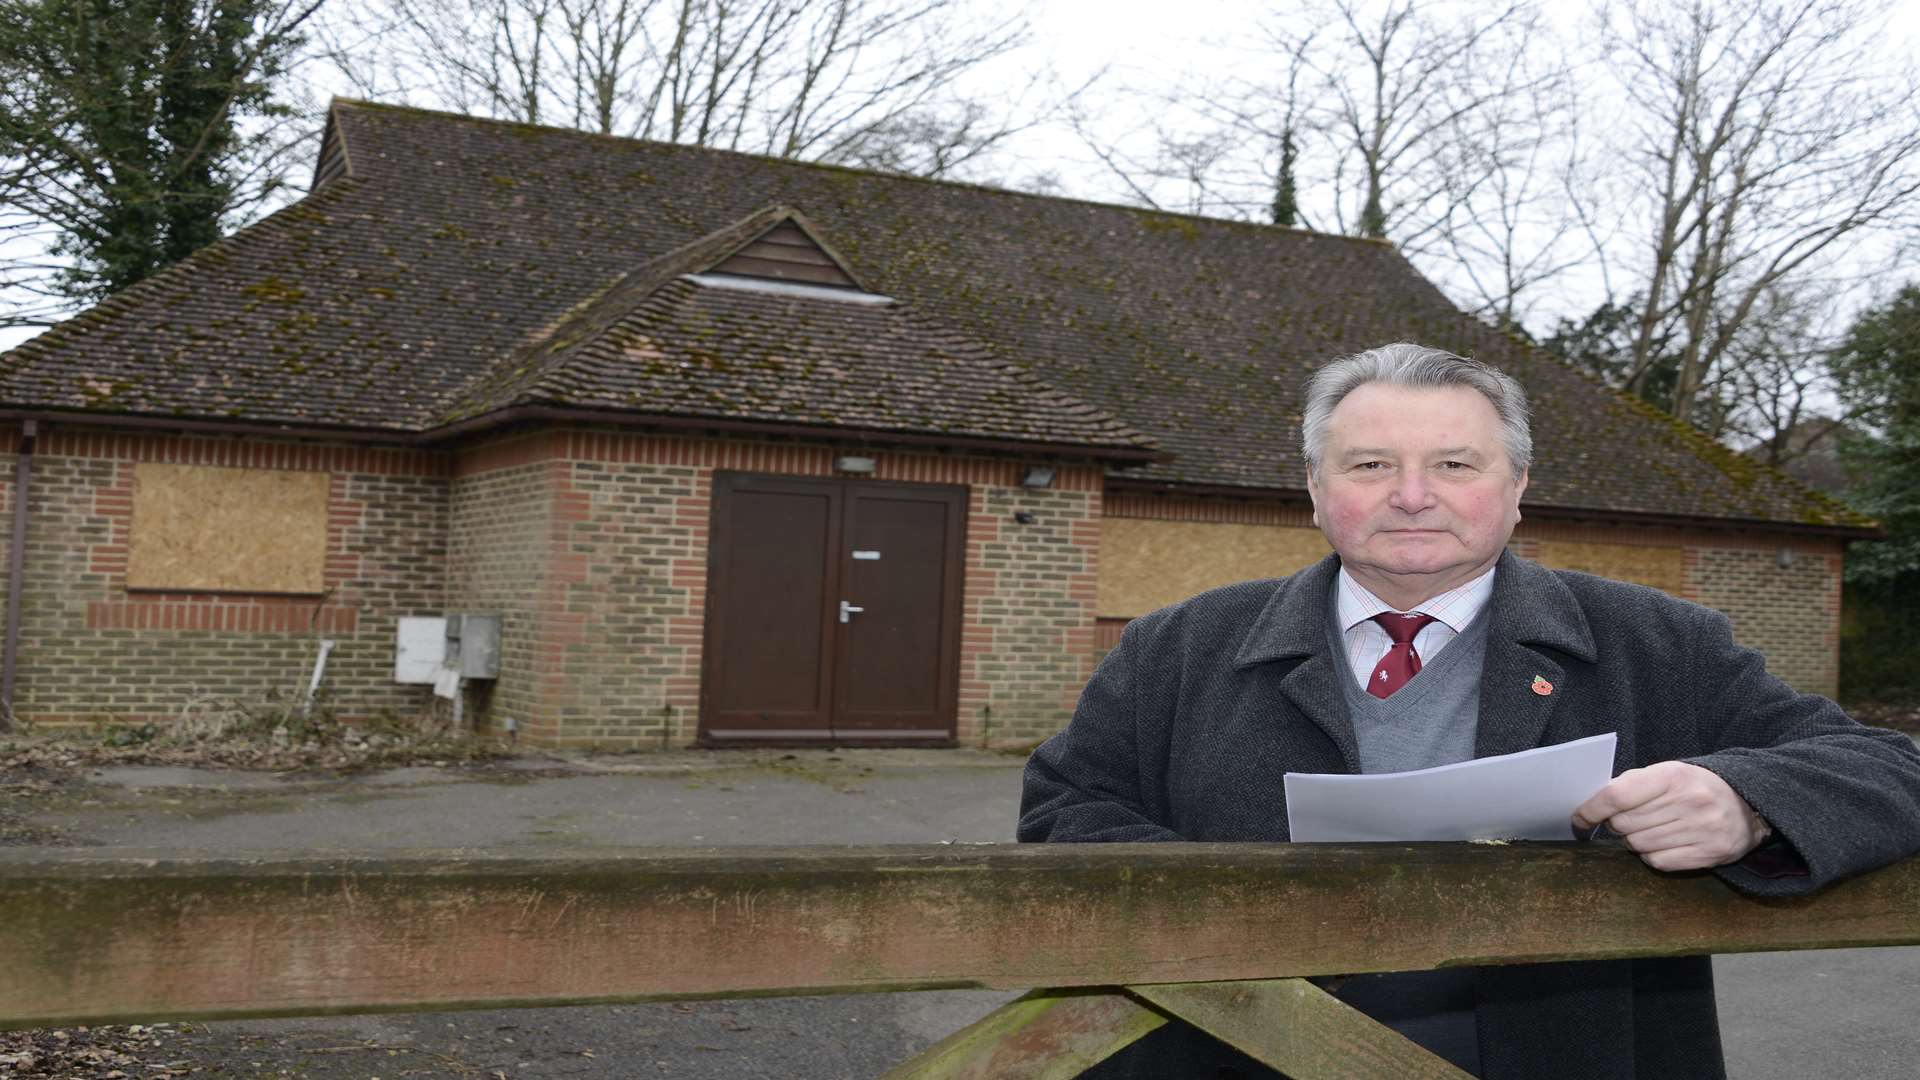 Cllr Alan Sugden outside the old St John Ambulance hall in Tenterden.